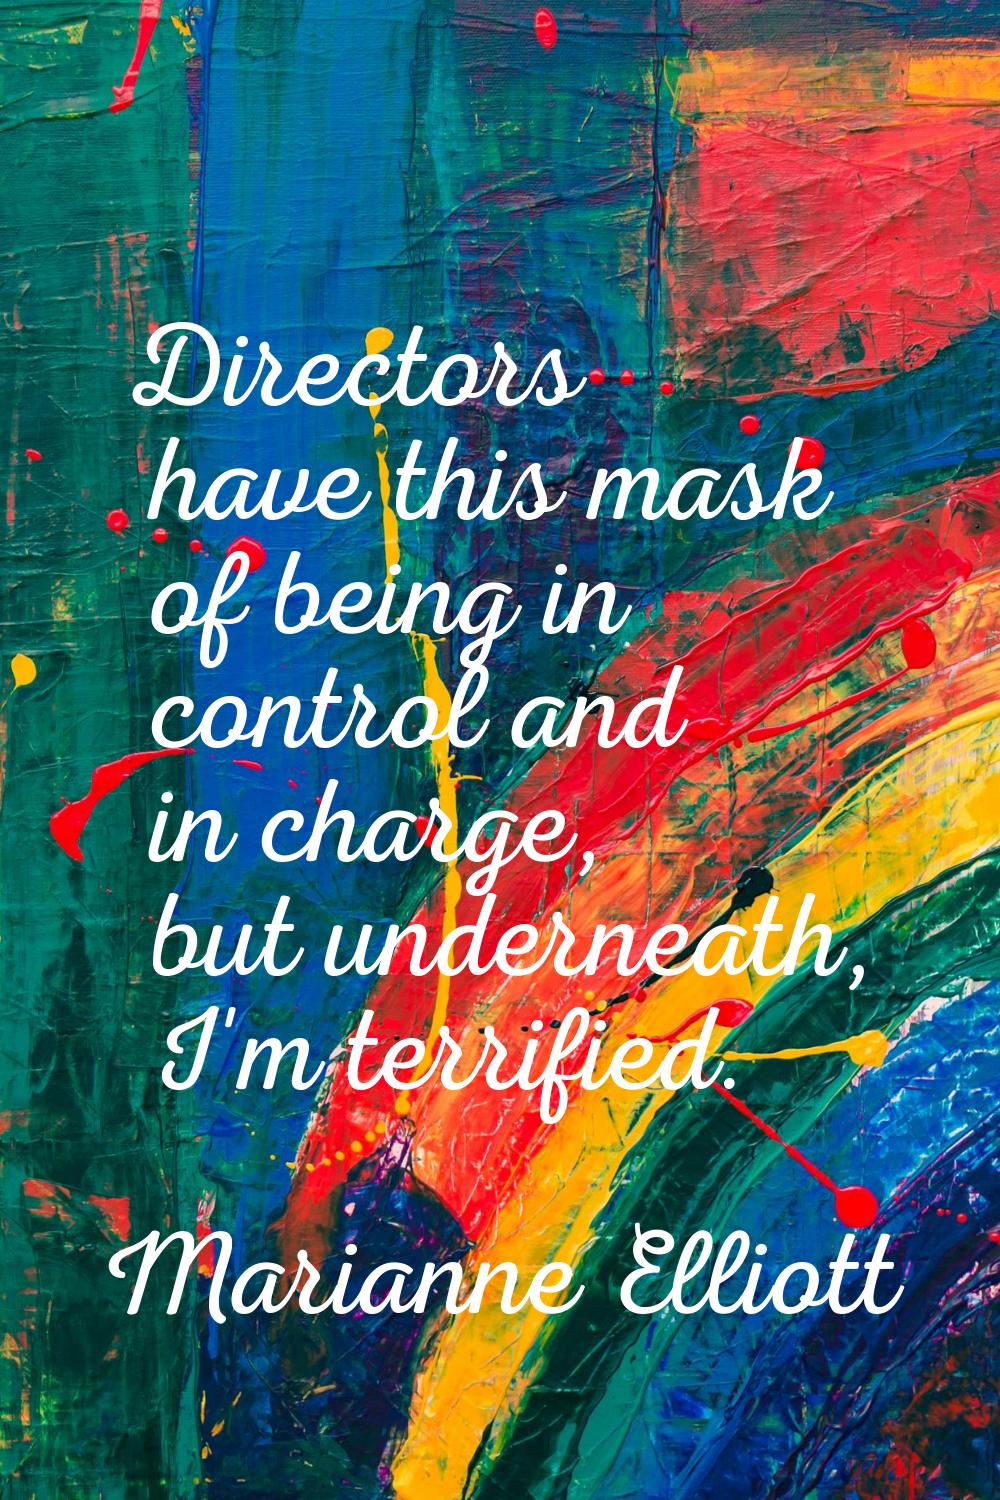 Directors have this mask of being in control and in charge, but underneath, I'm terrified.